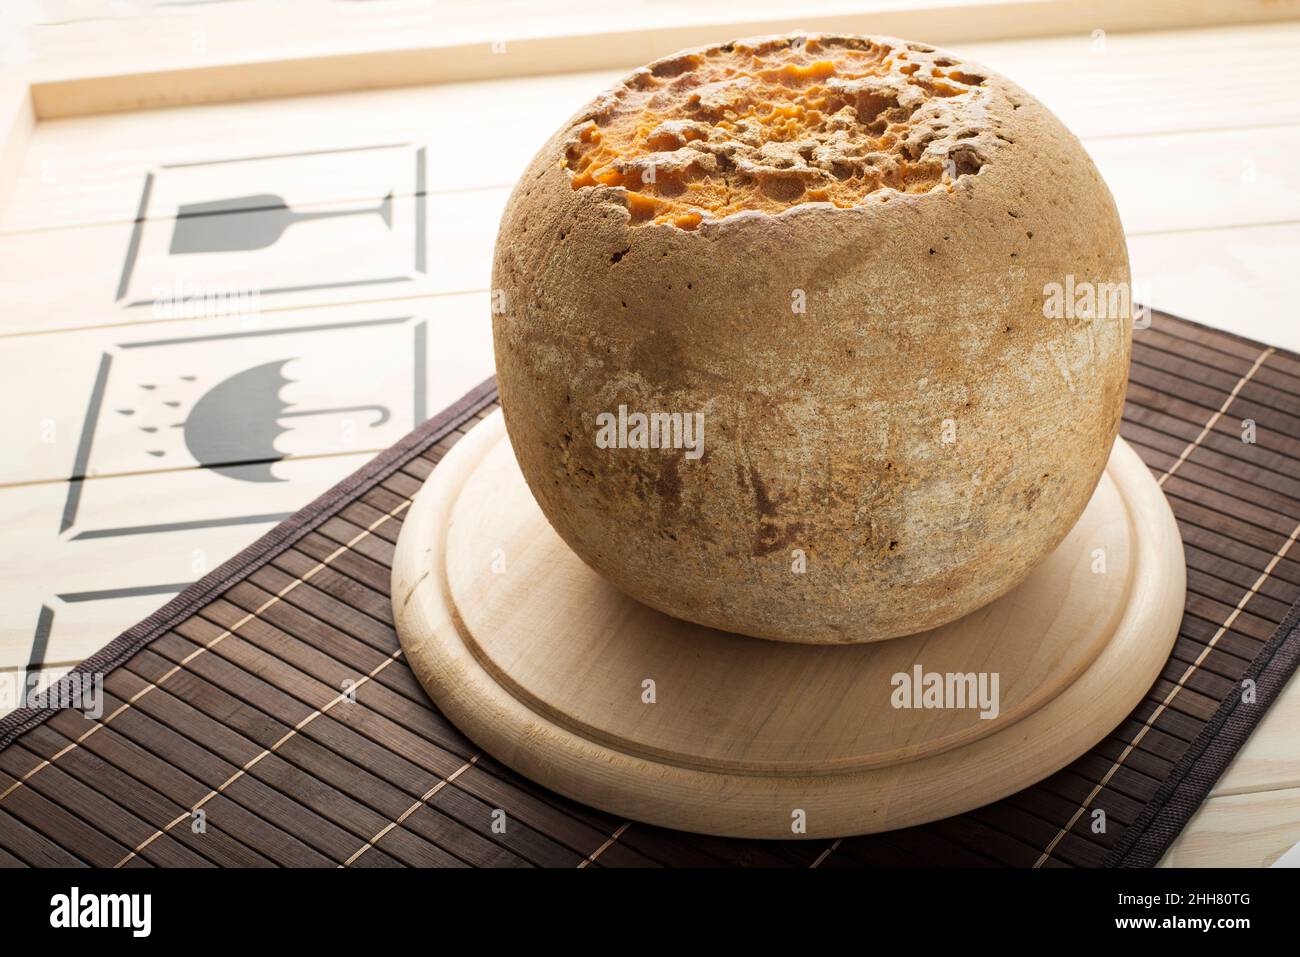 Whole Mimolette cheese loaf on a wooden plate. Stock Photo